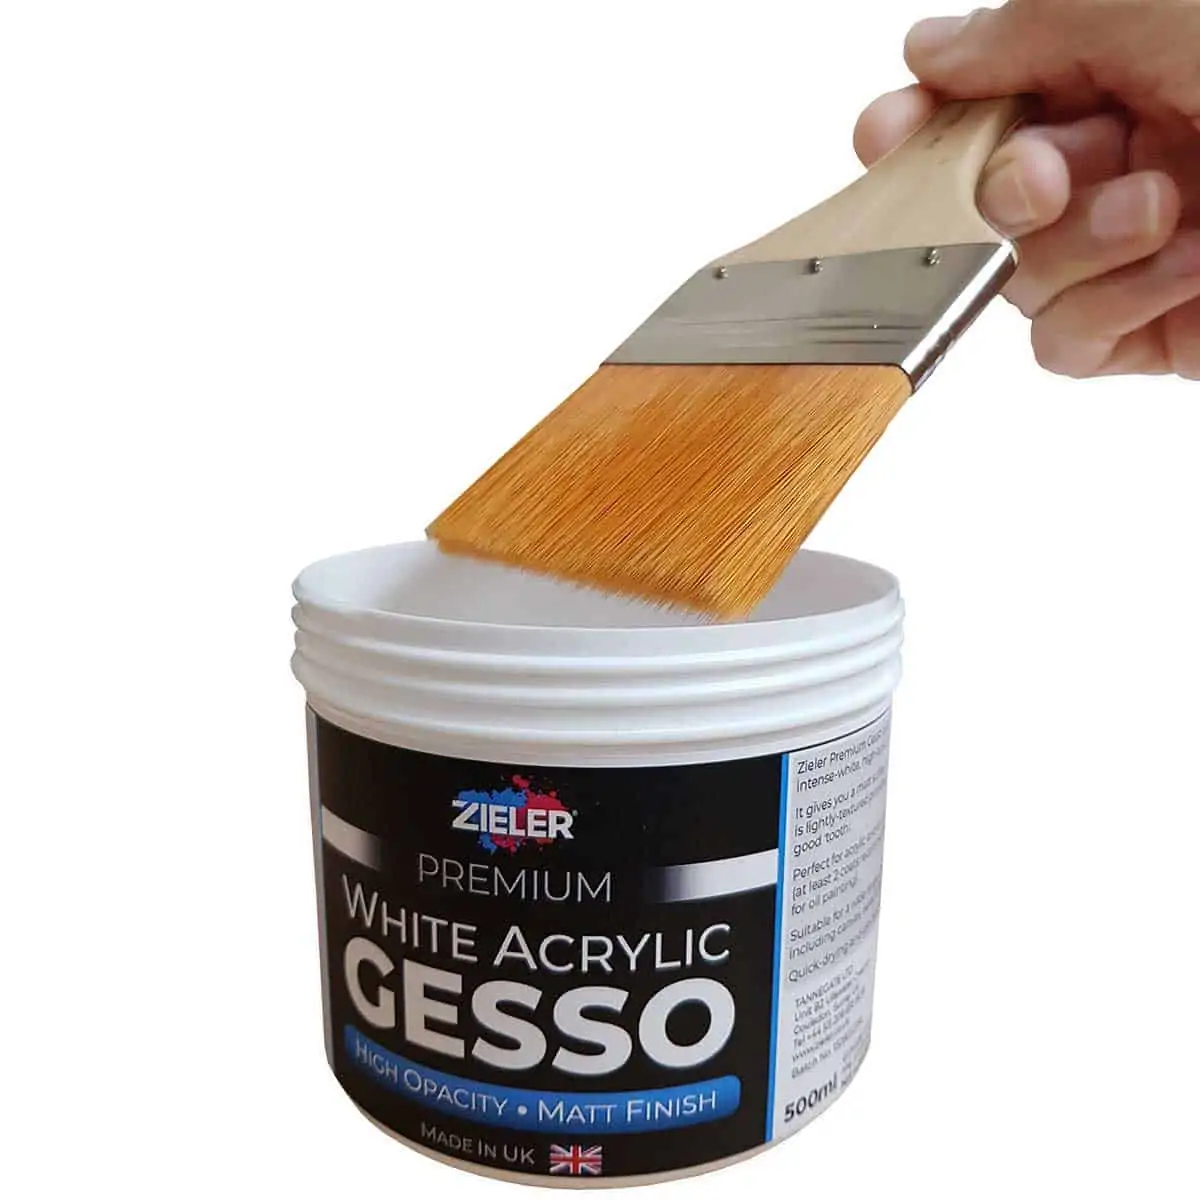 How to seal and gesso a wooden panel